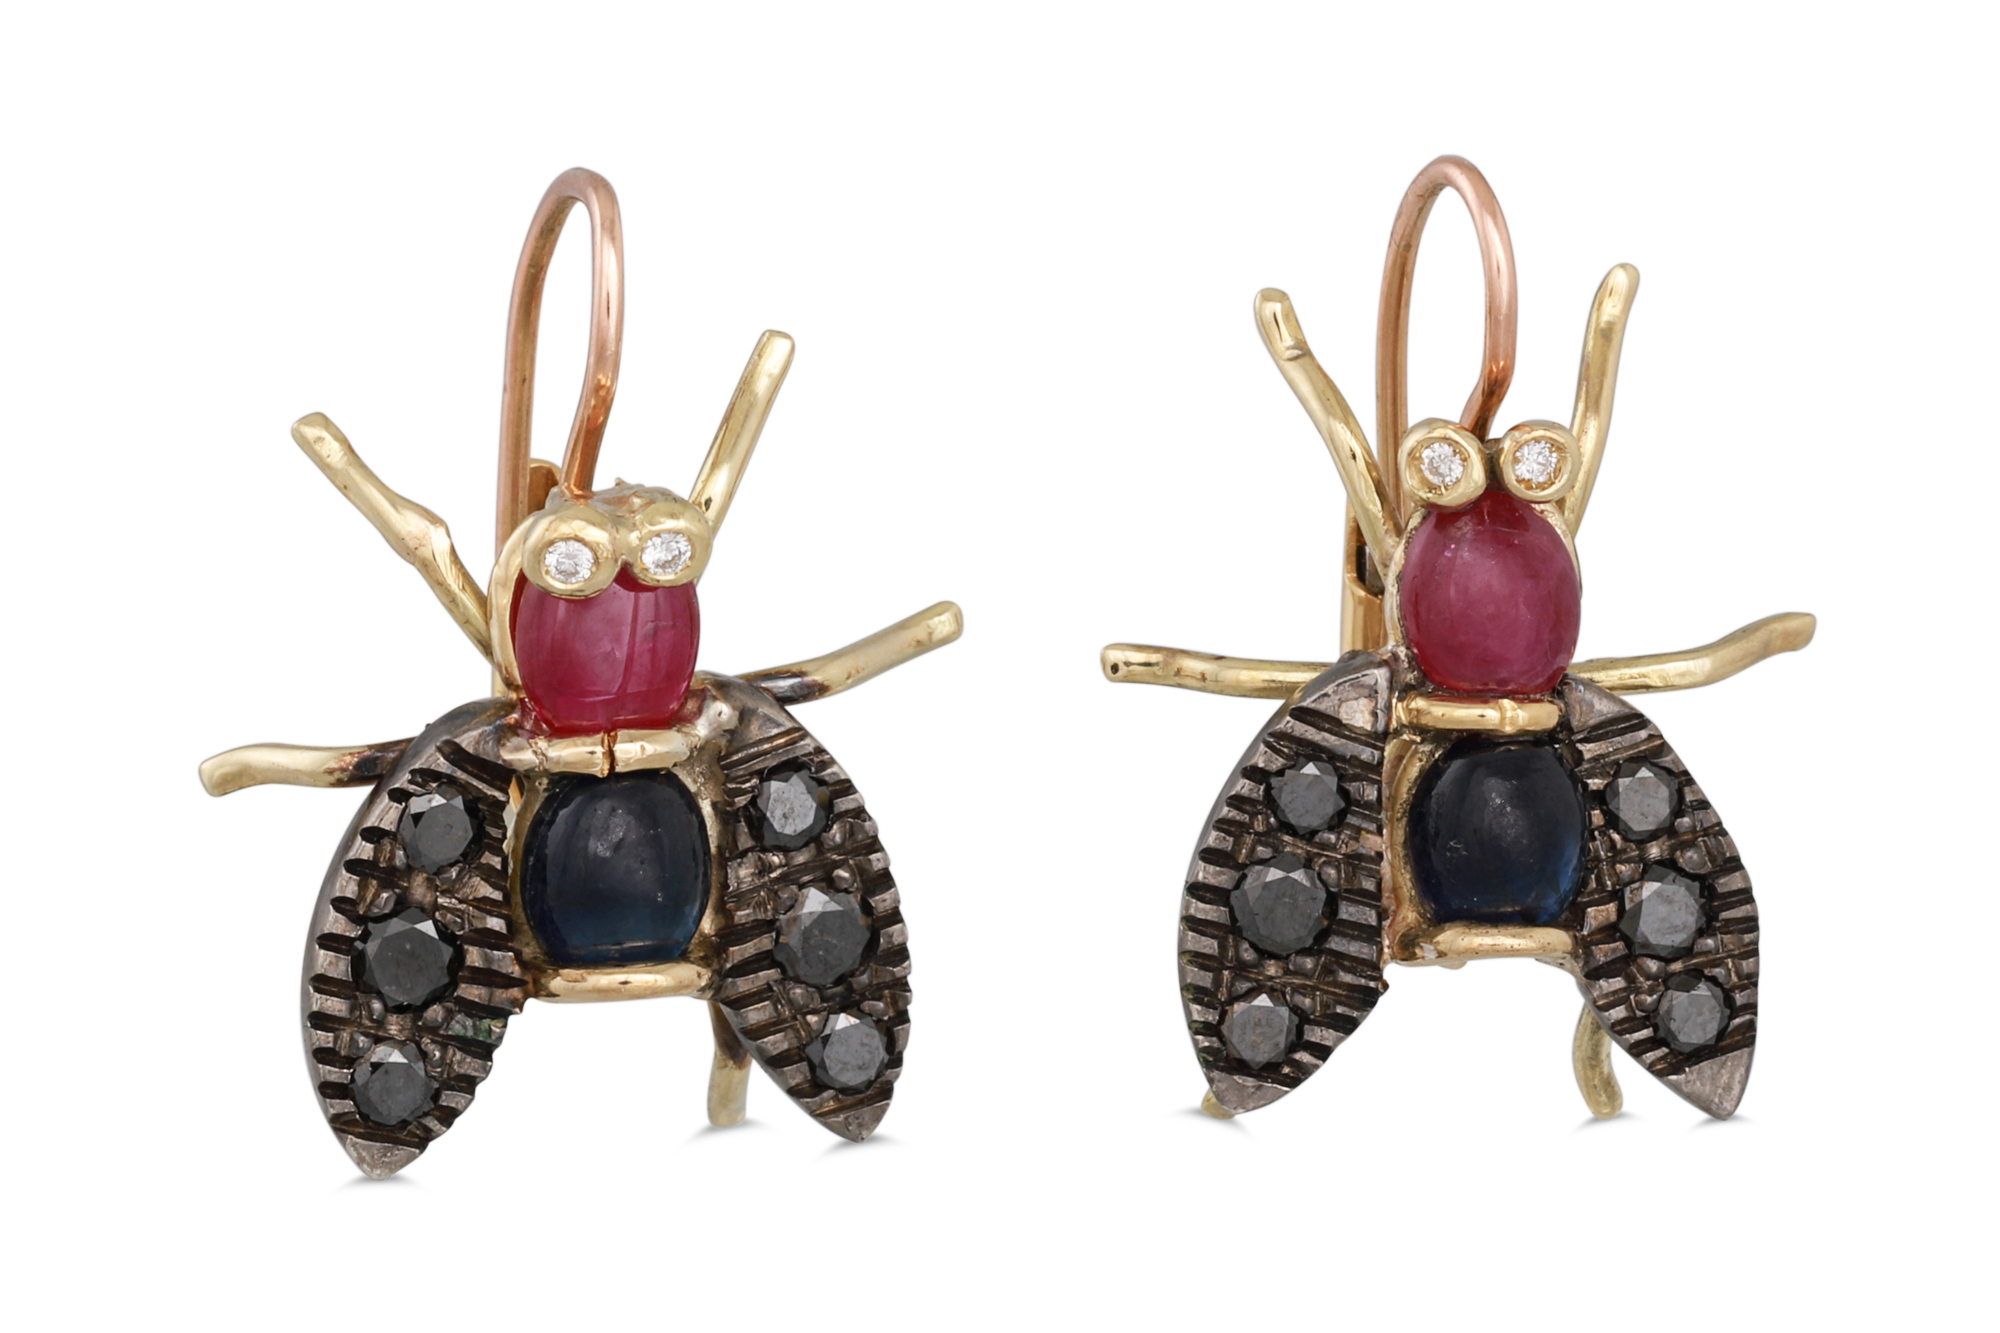 A PAIR OF NOVELTY EARRINGS, modelled as bees, set with cabochon rubies & sapphires in 14ct gold